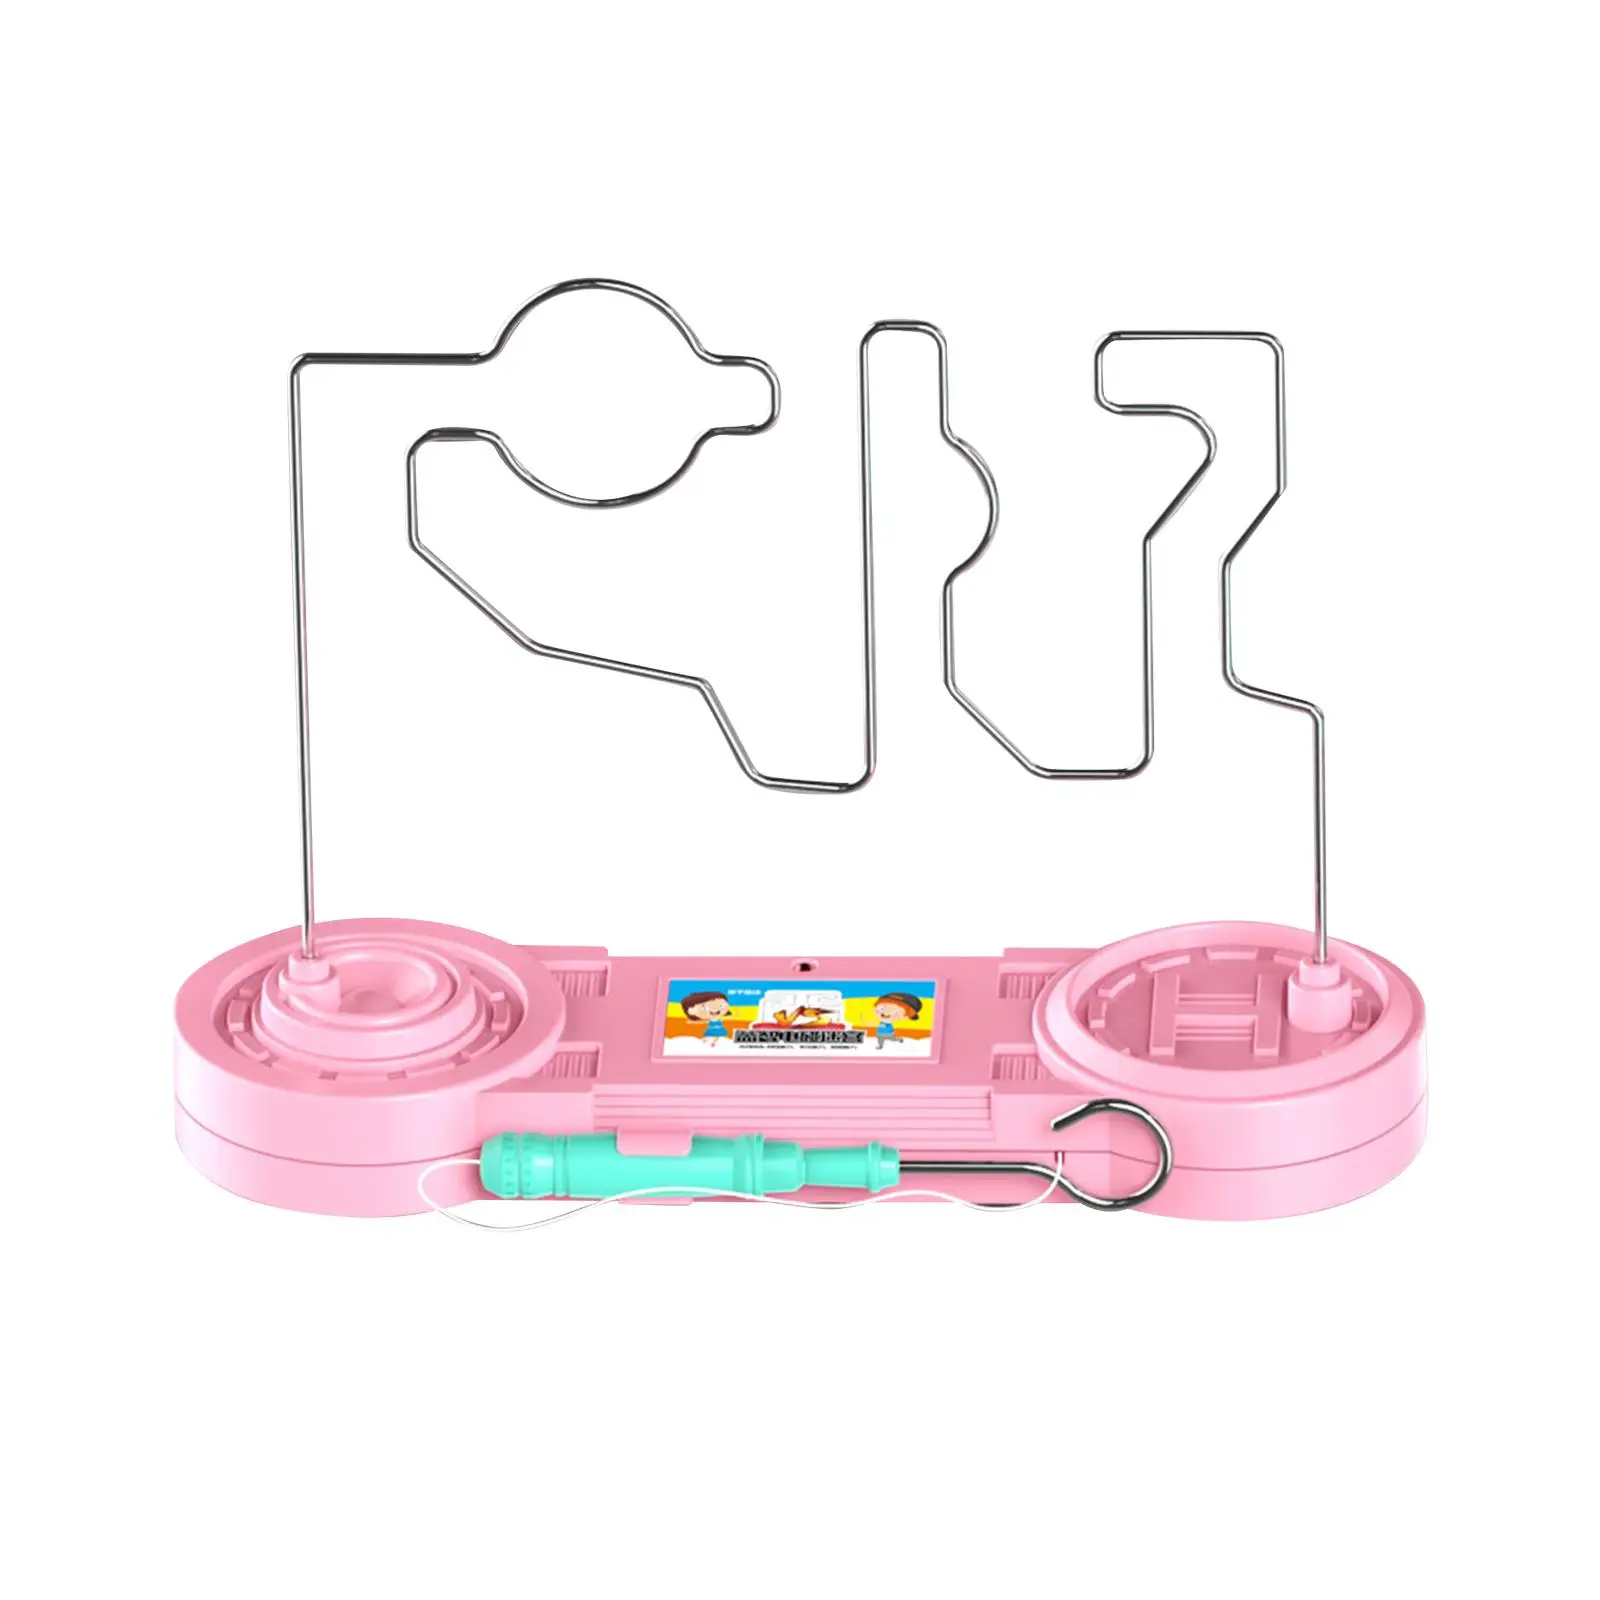 Electric Bump Maze Game Toy for Toddlers Christmas Children